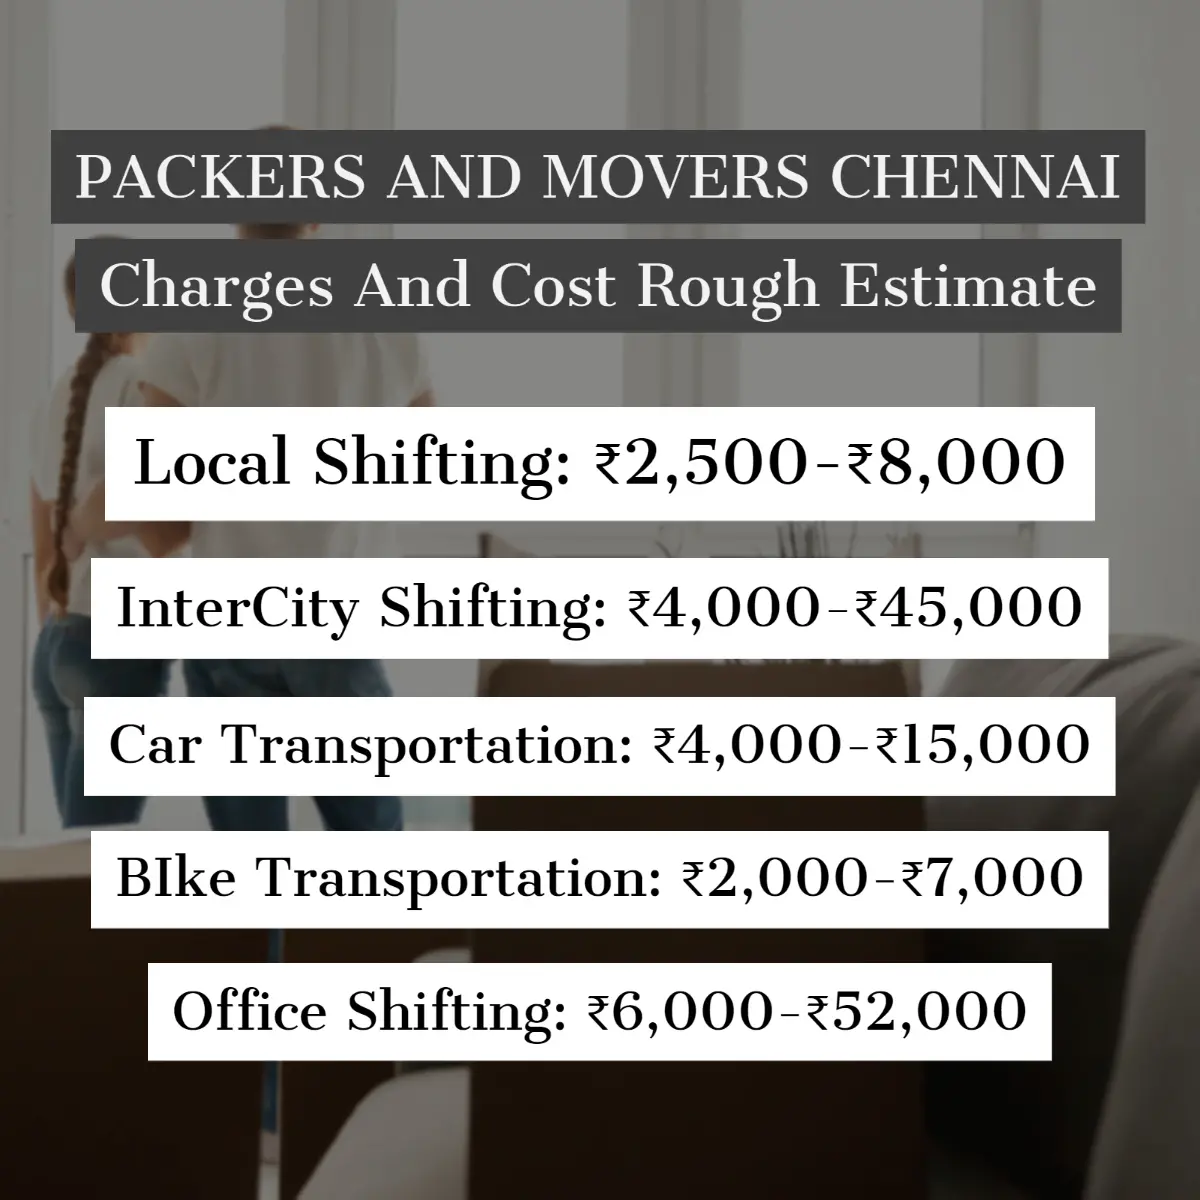 Packers and Movers Chennai Charges